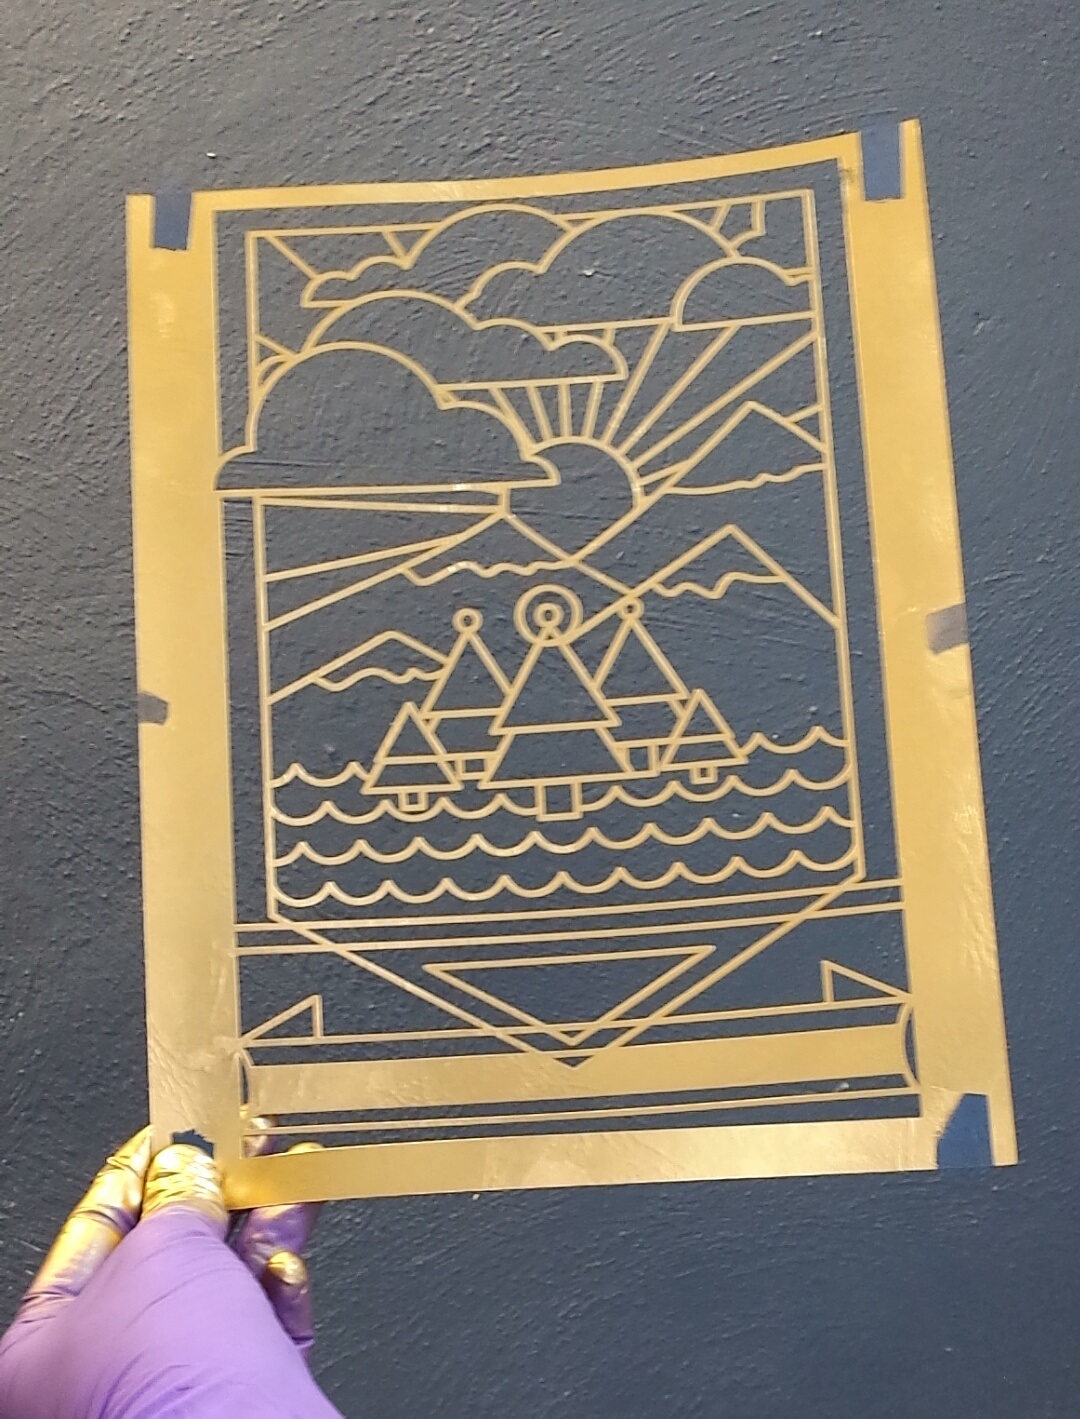 Laser cut poster held up after stencilling